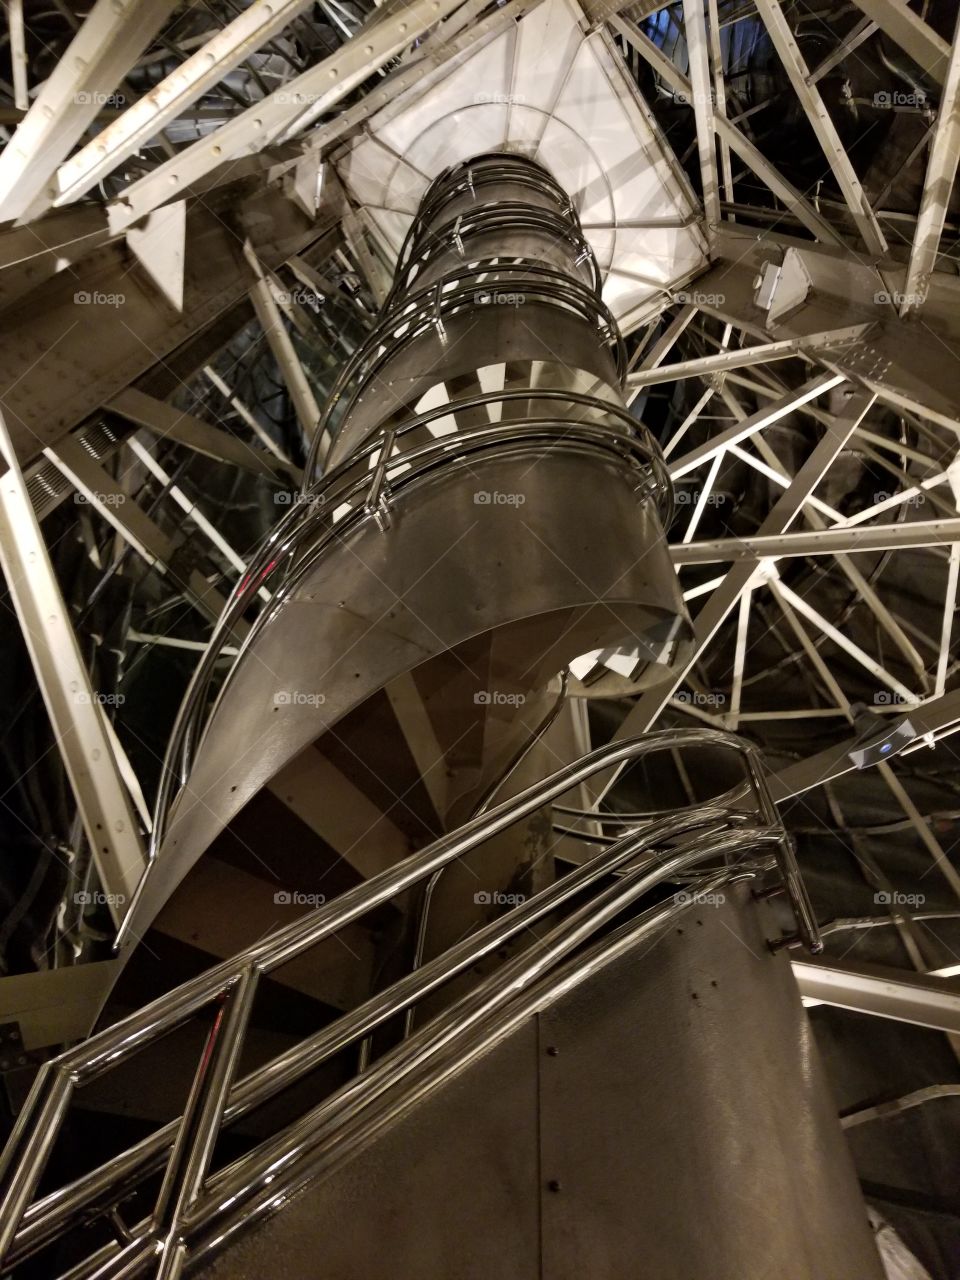 Spiral staircase inside lady liberty